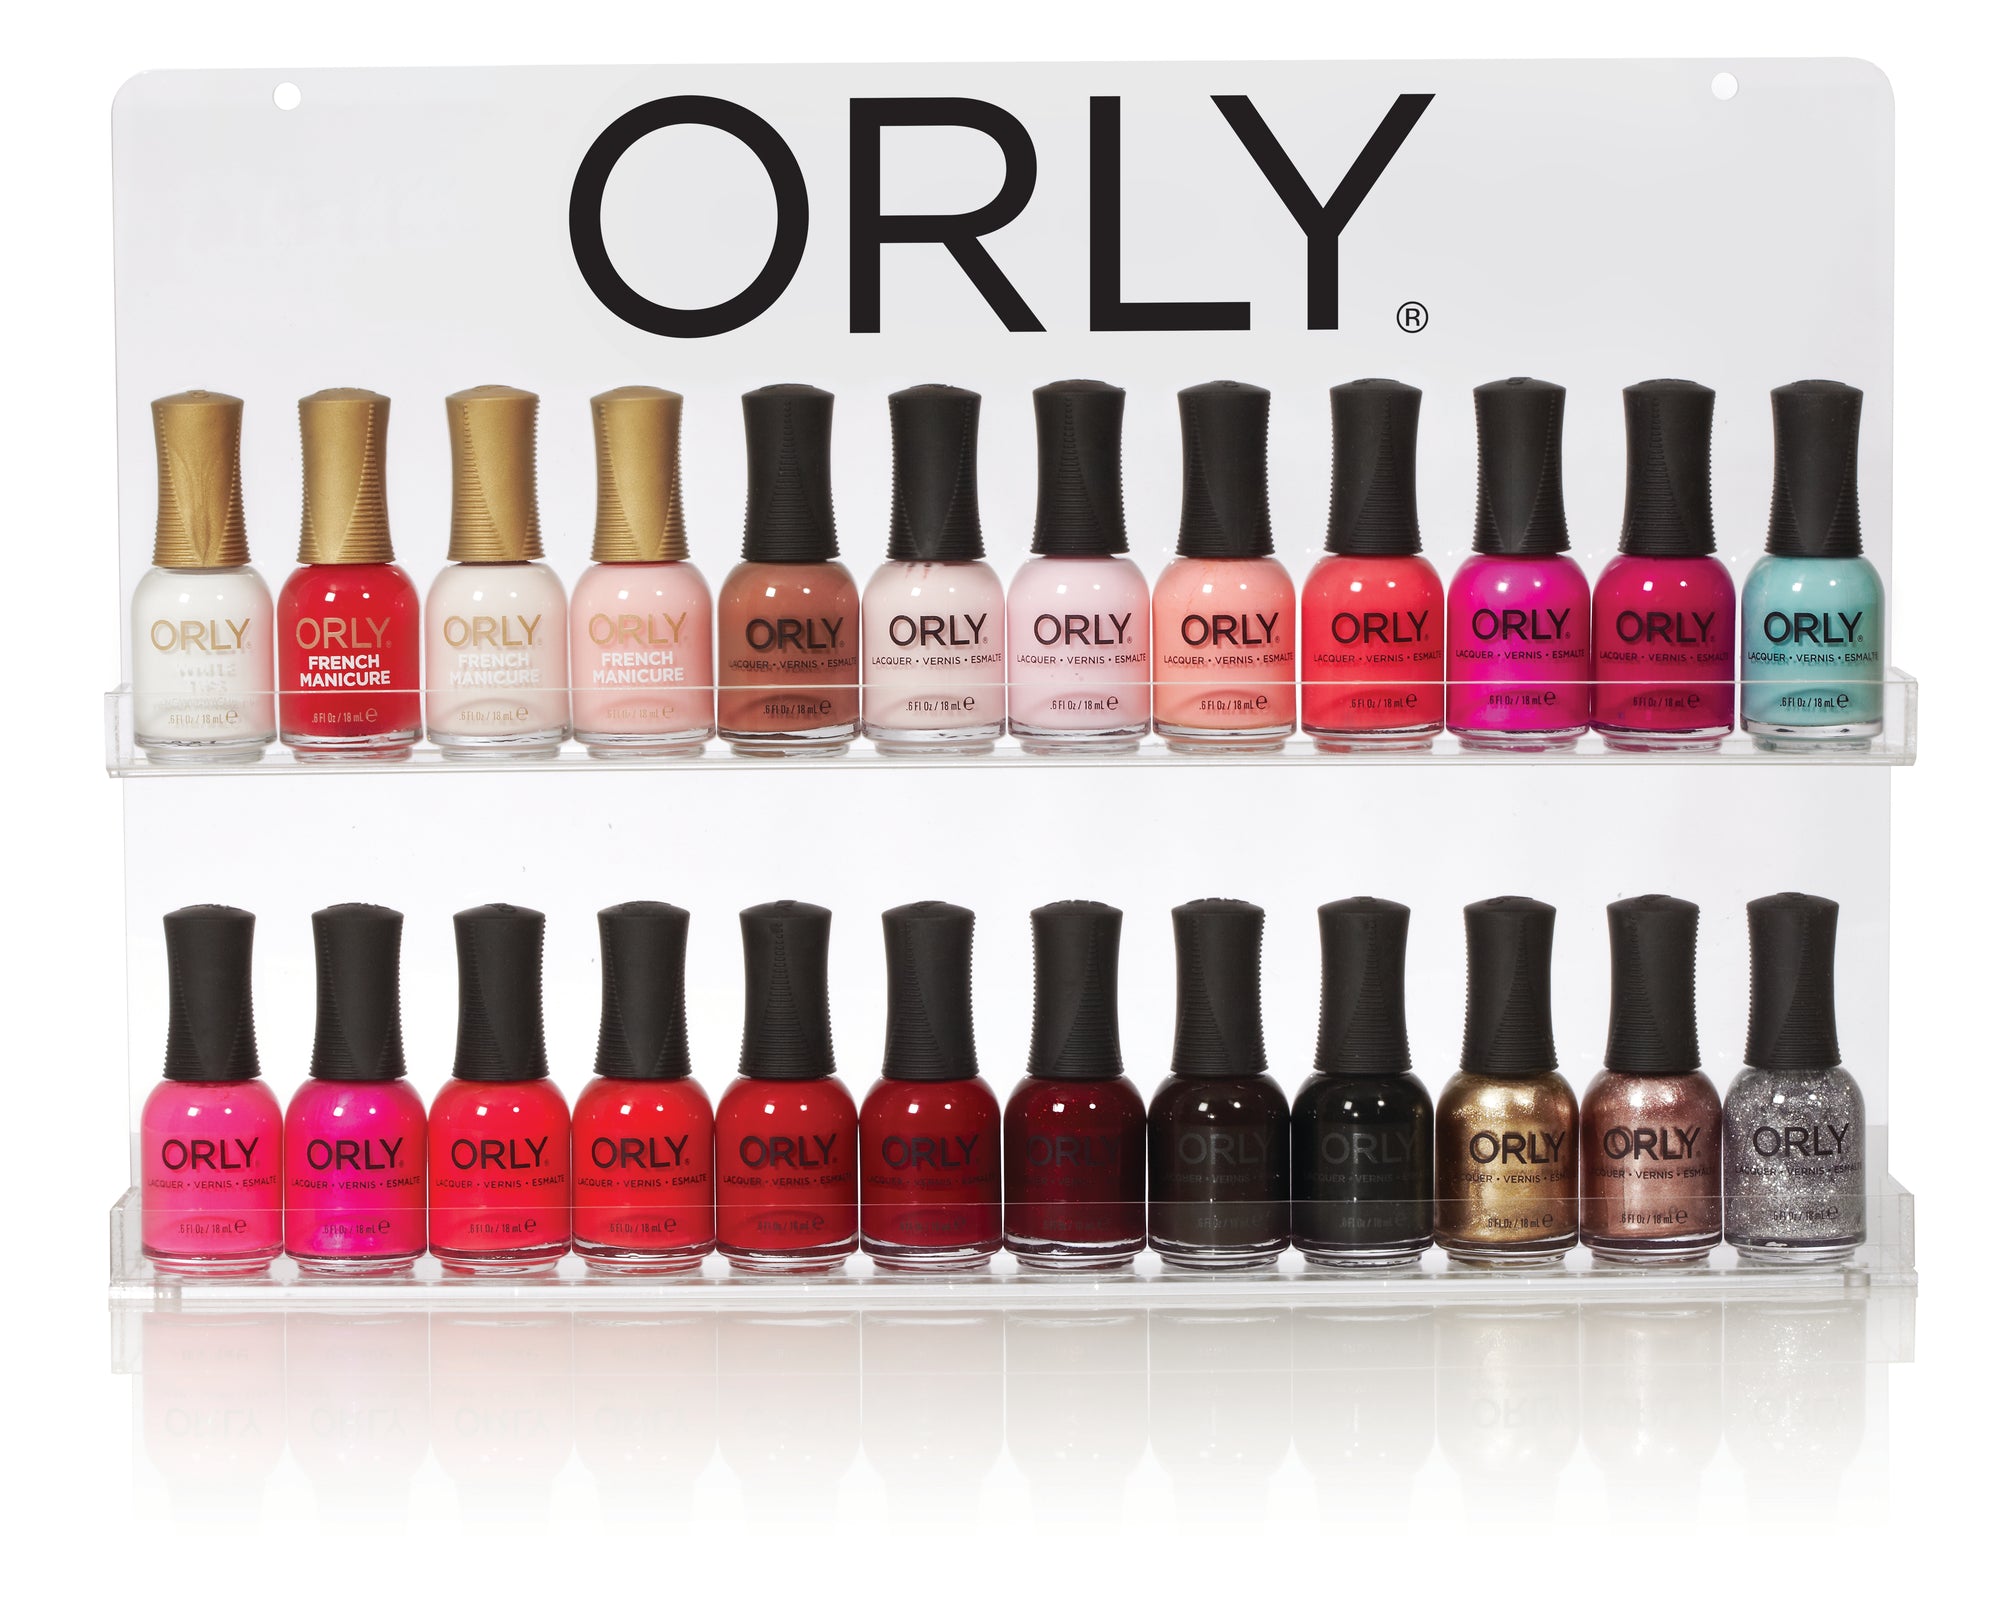 ORLY 24pc Salon Wall Display (Display only)